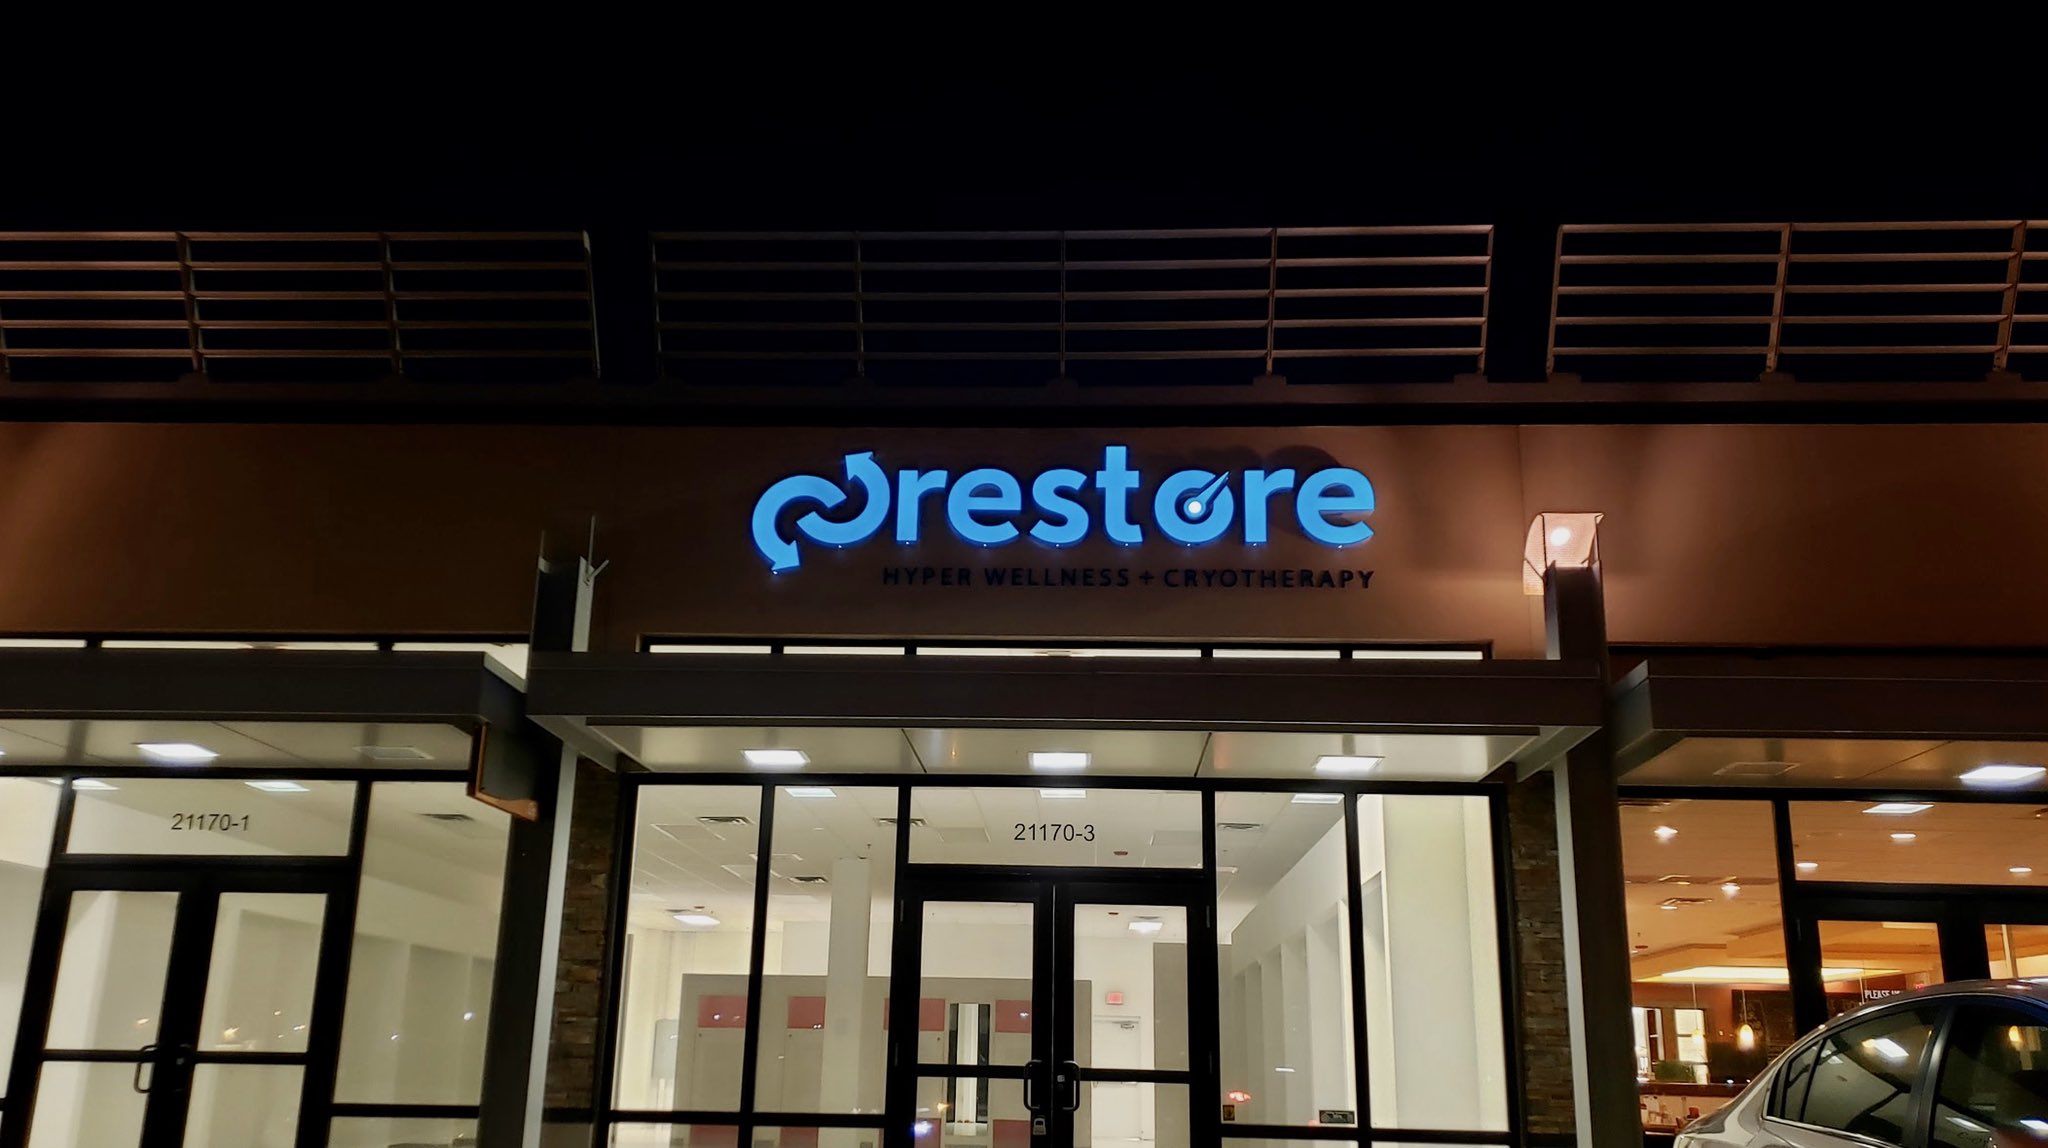 Front-lit channel letters should deliver a strong impact both day and night.